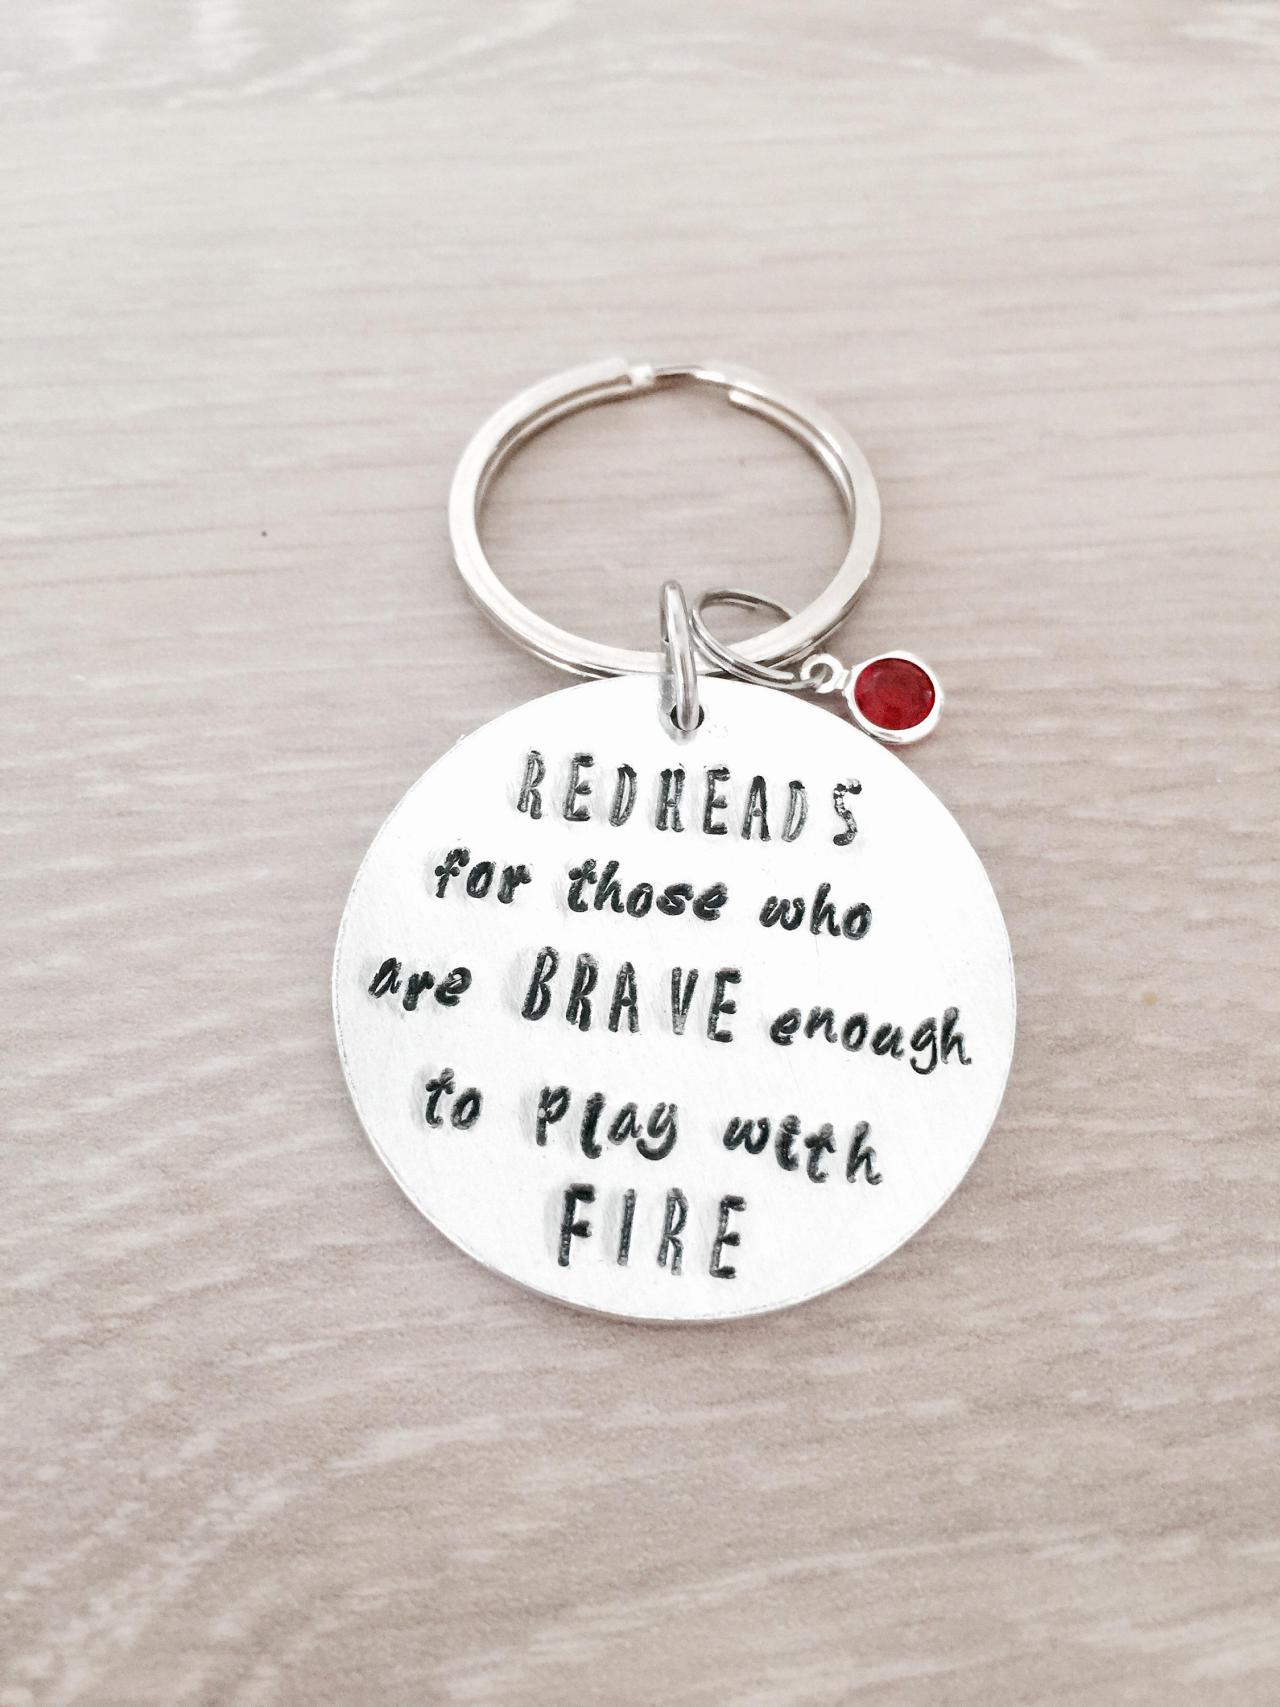 Redheads for those brave enough to play with fire handstamped keyring, redheads, funny gift, joke, birthday present, friend, for him,